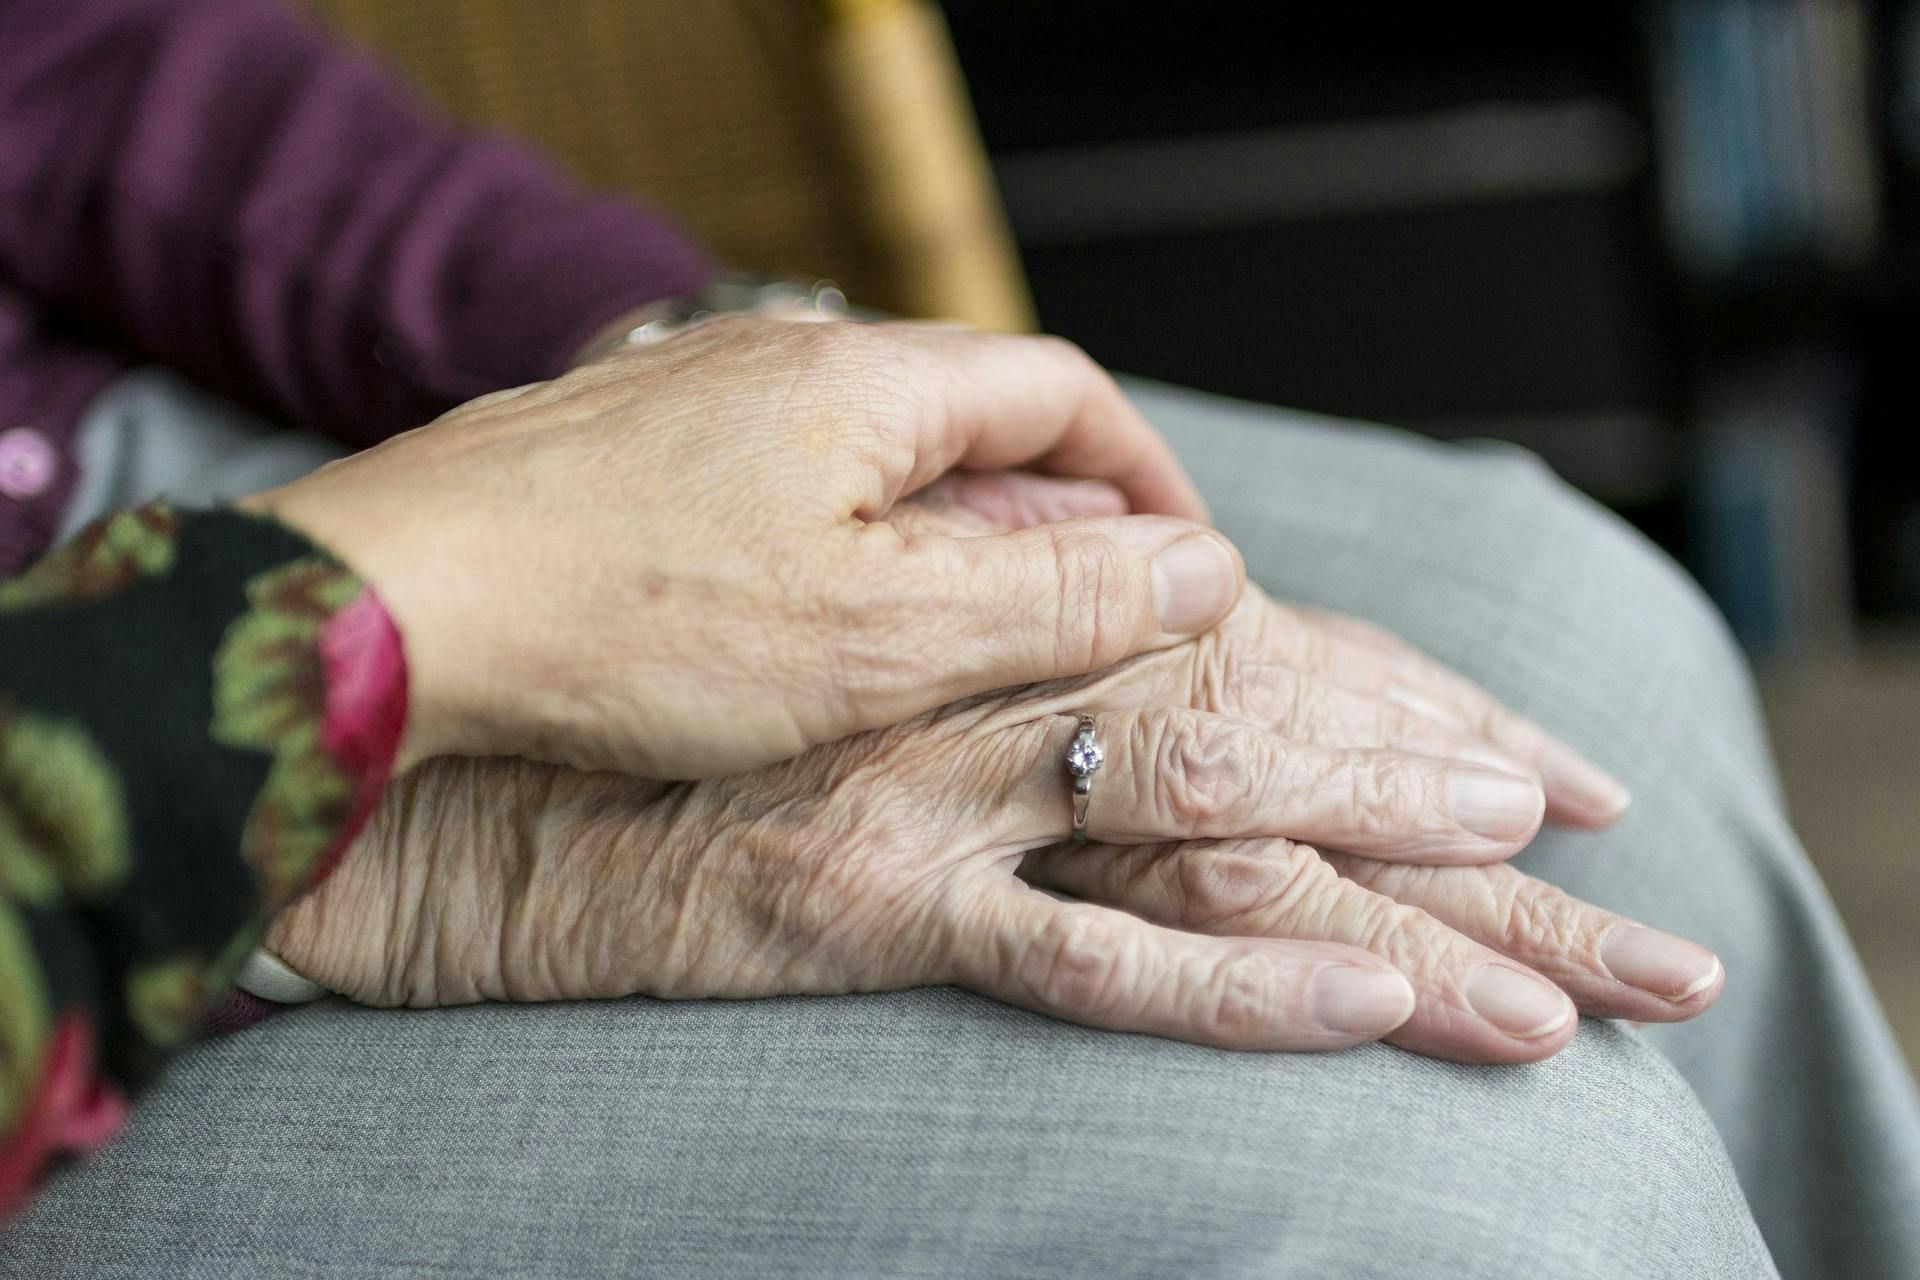 An elderly person's hand with a ring is clasped gently by another person's hand, set against a background of gray fabric and blurred room details.